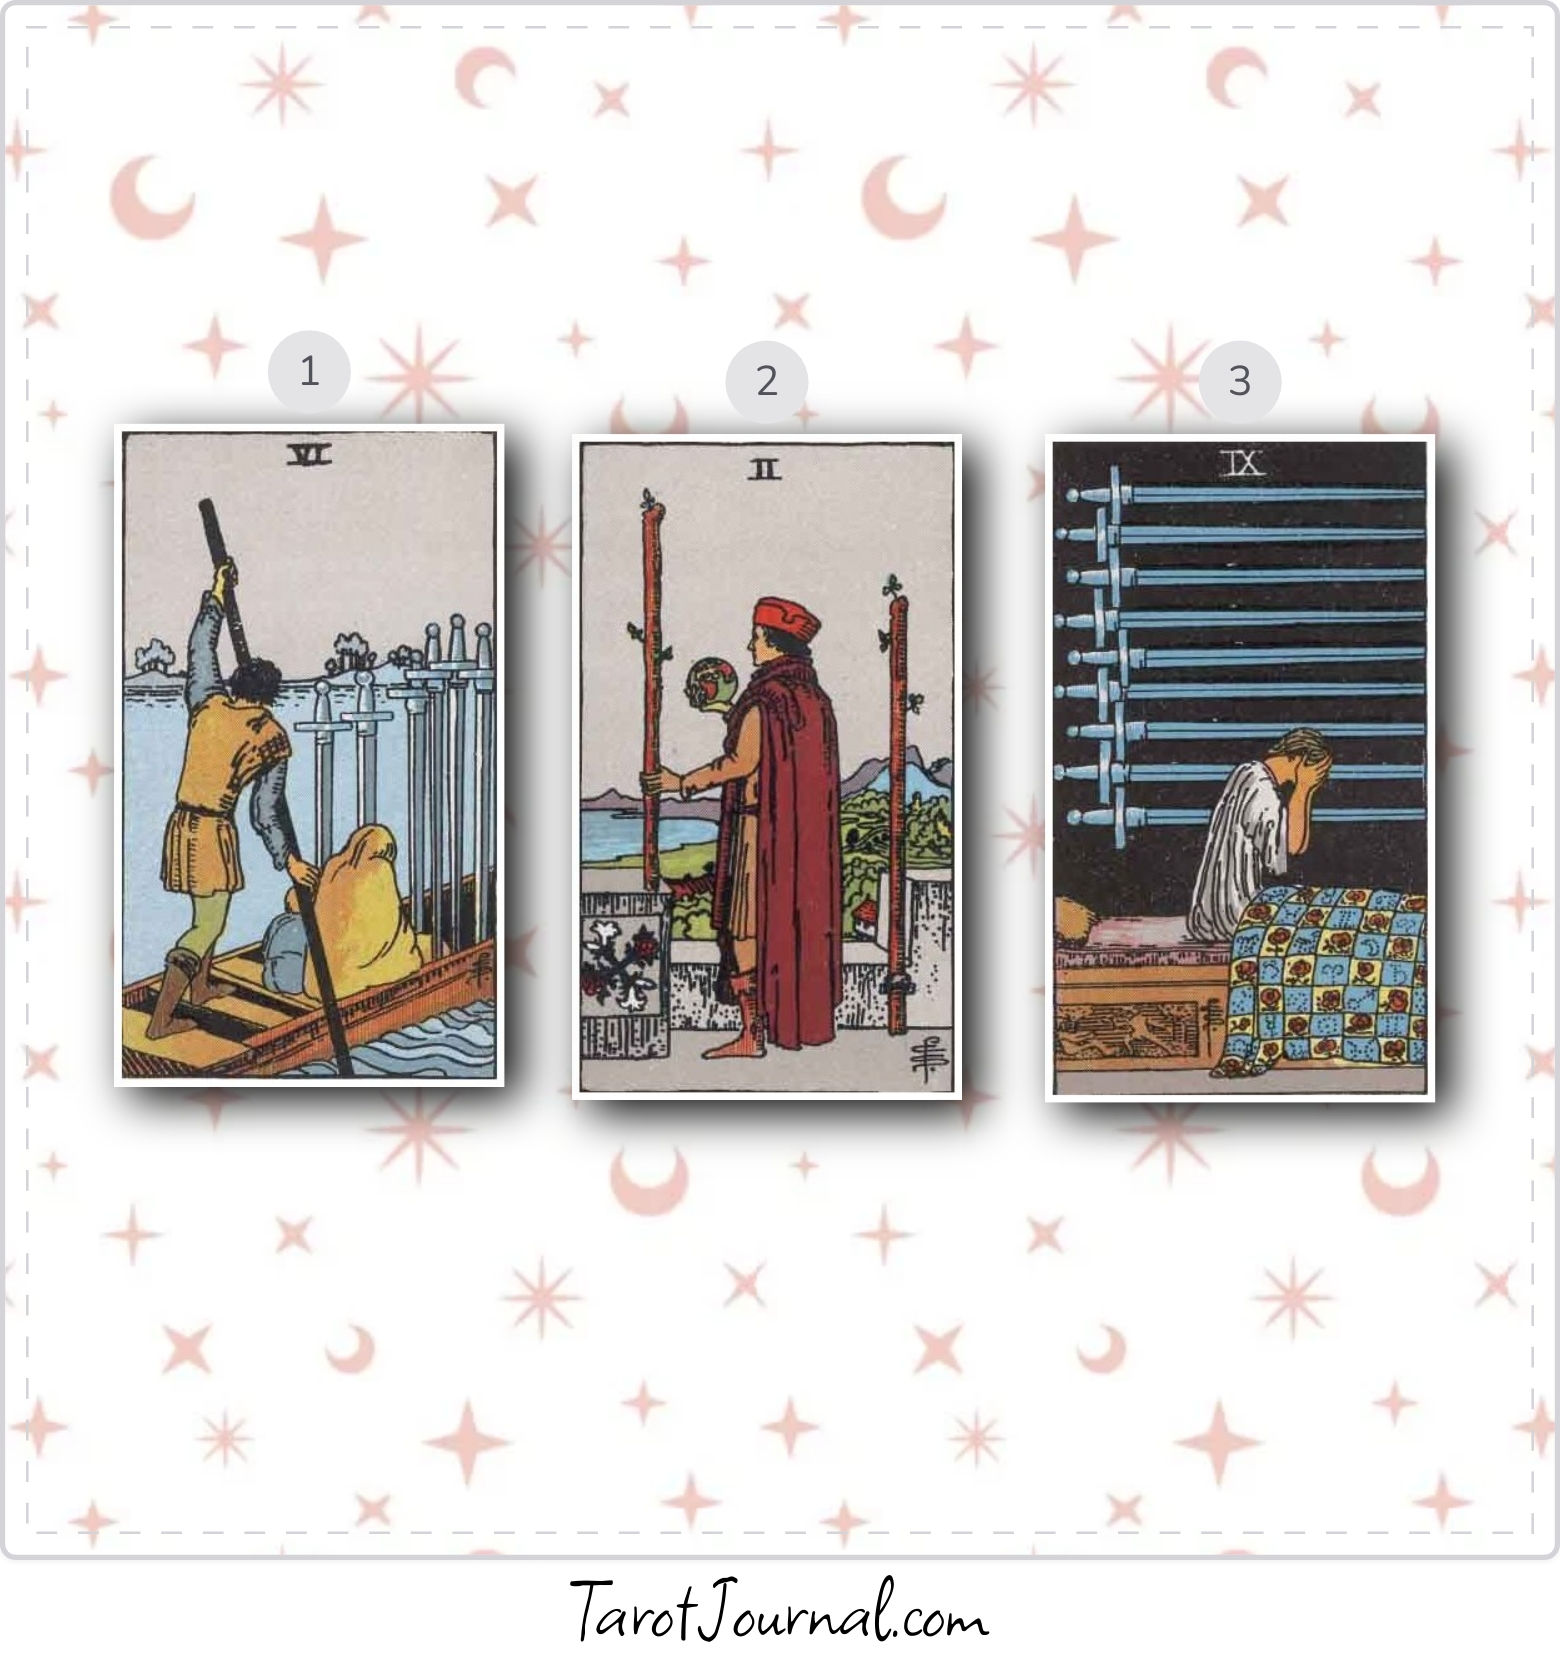 Do I pursue him? What's in store for us? - tarot reading by moonlight